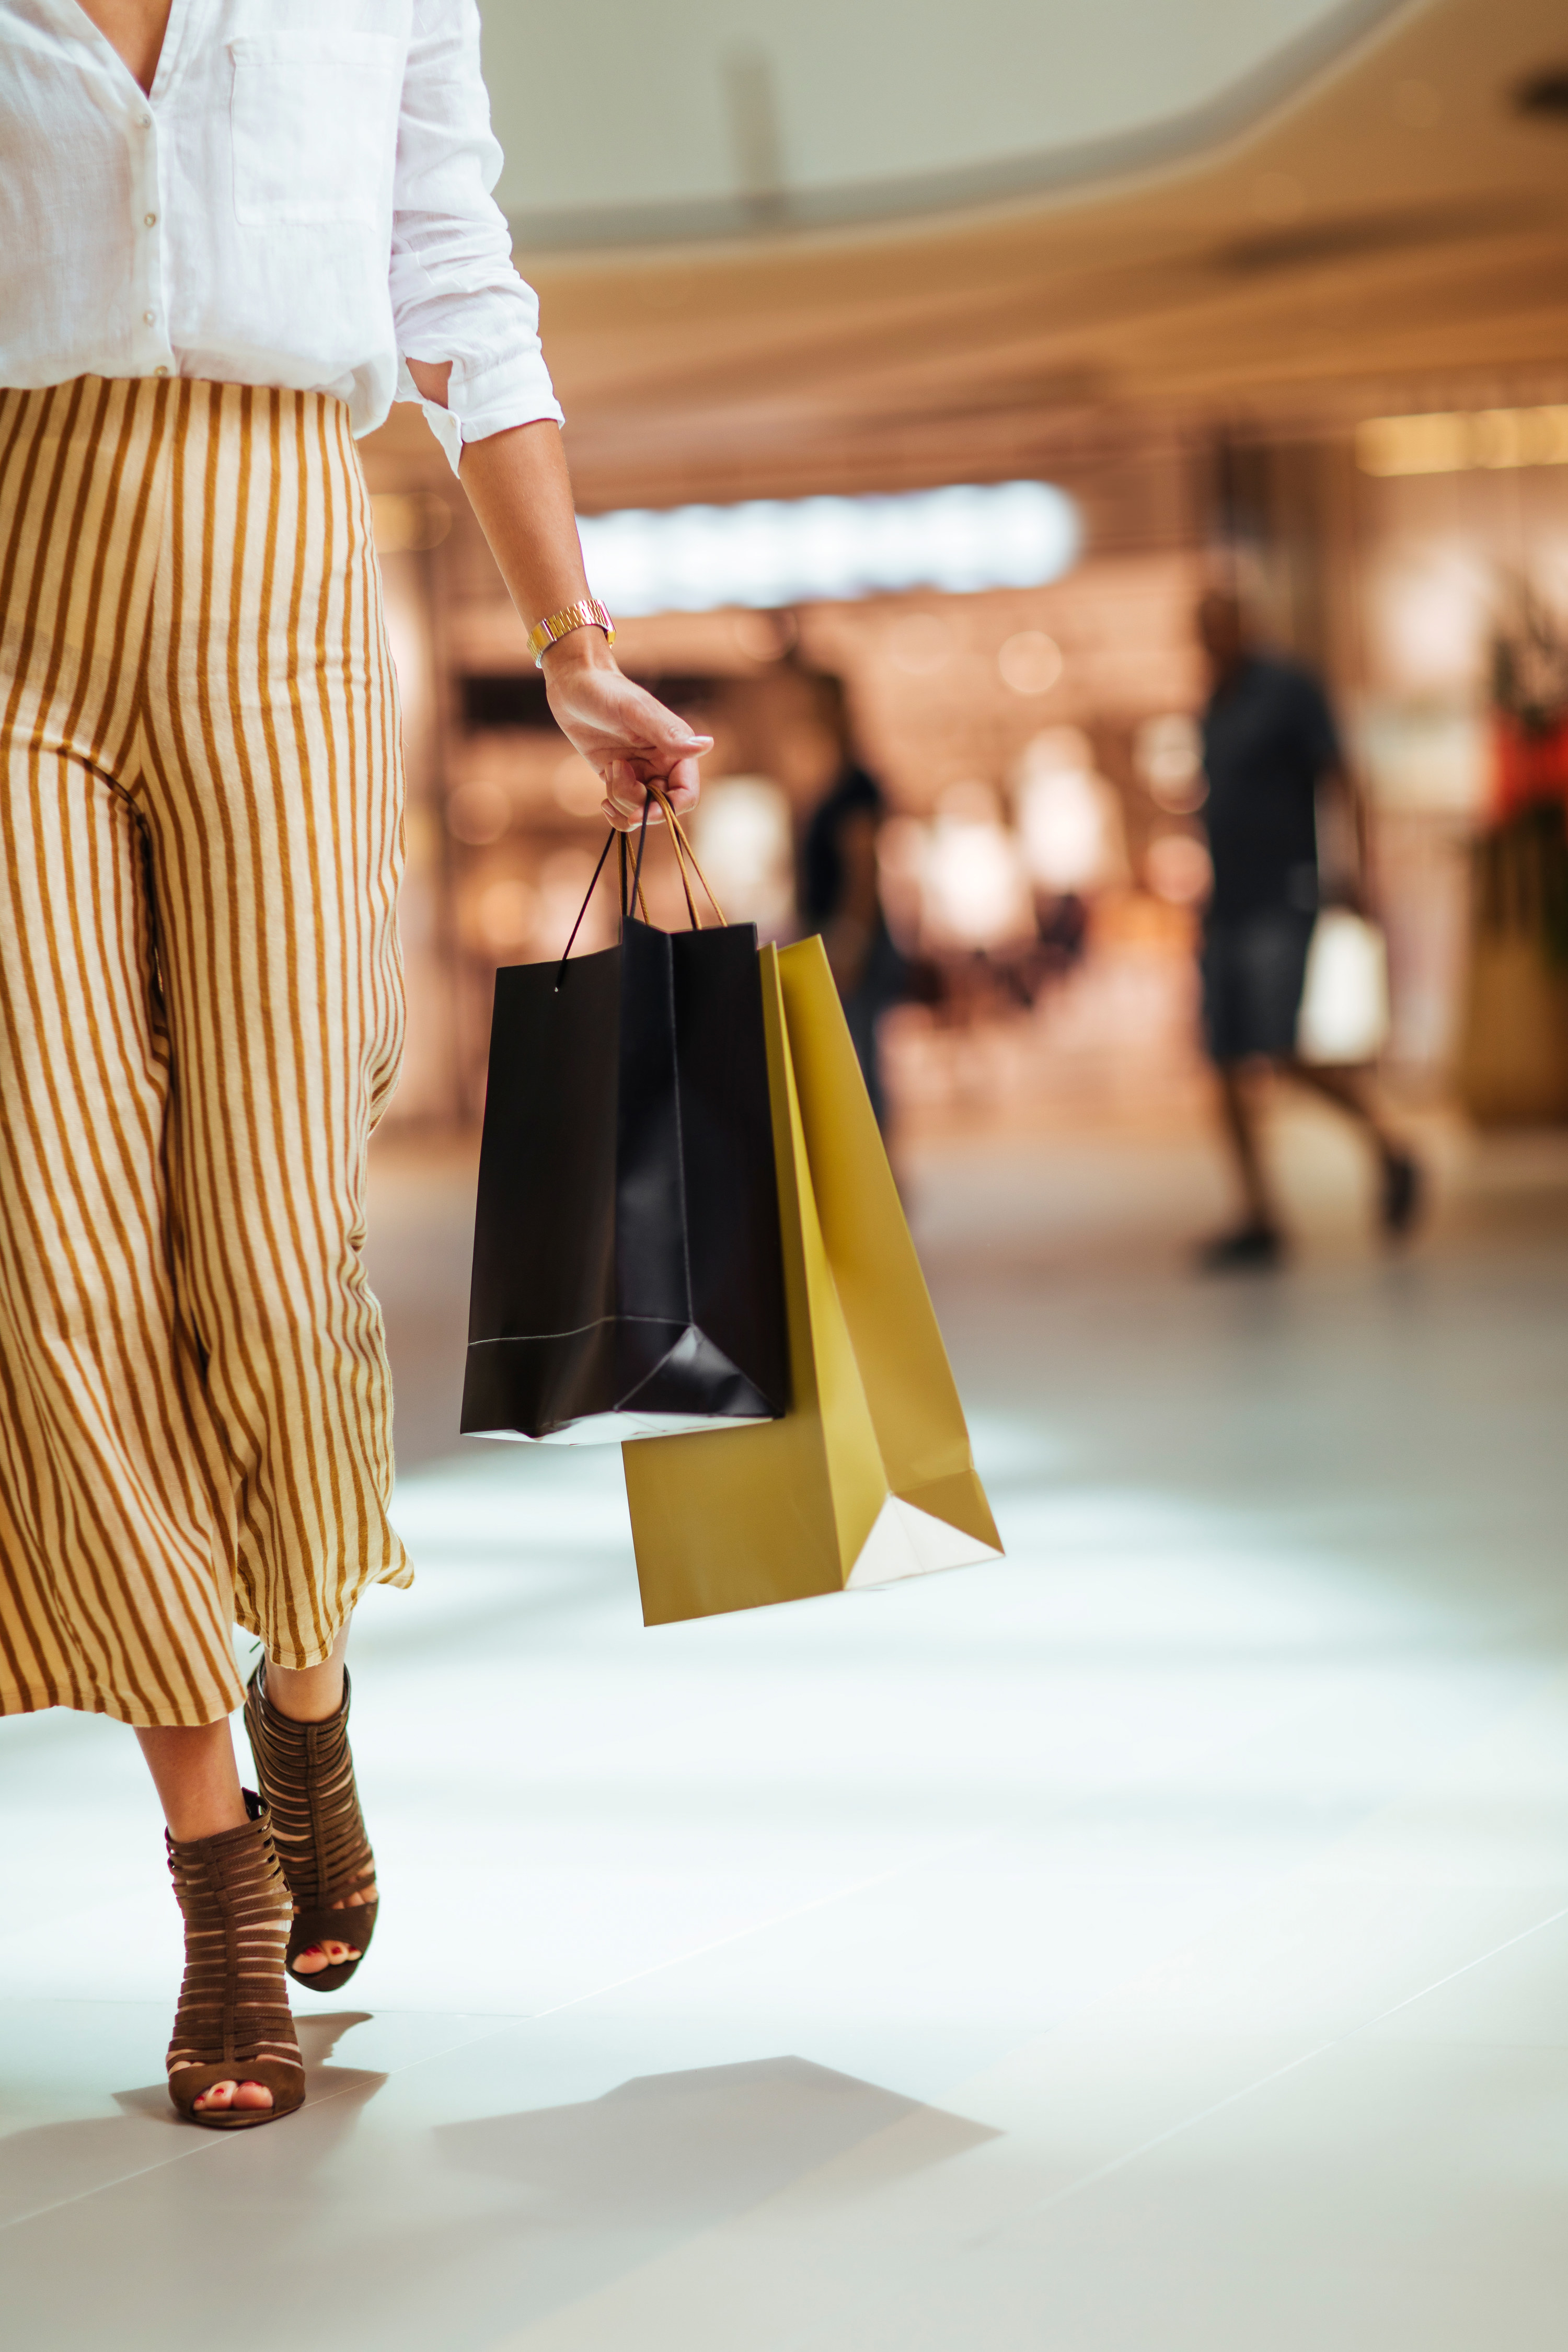 A woman carries a couple of shopping bags while walking through the mall